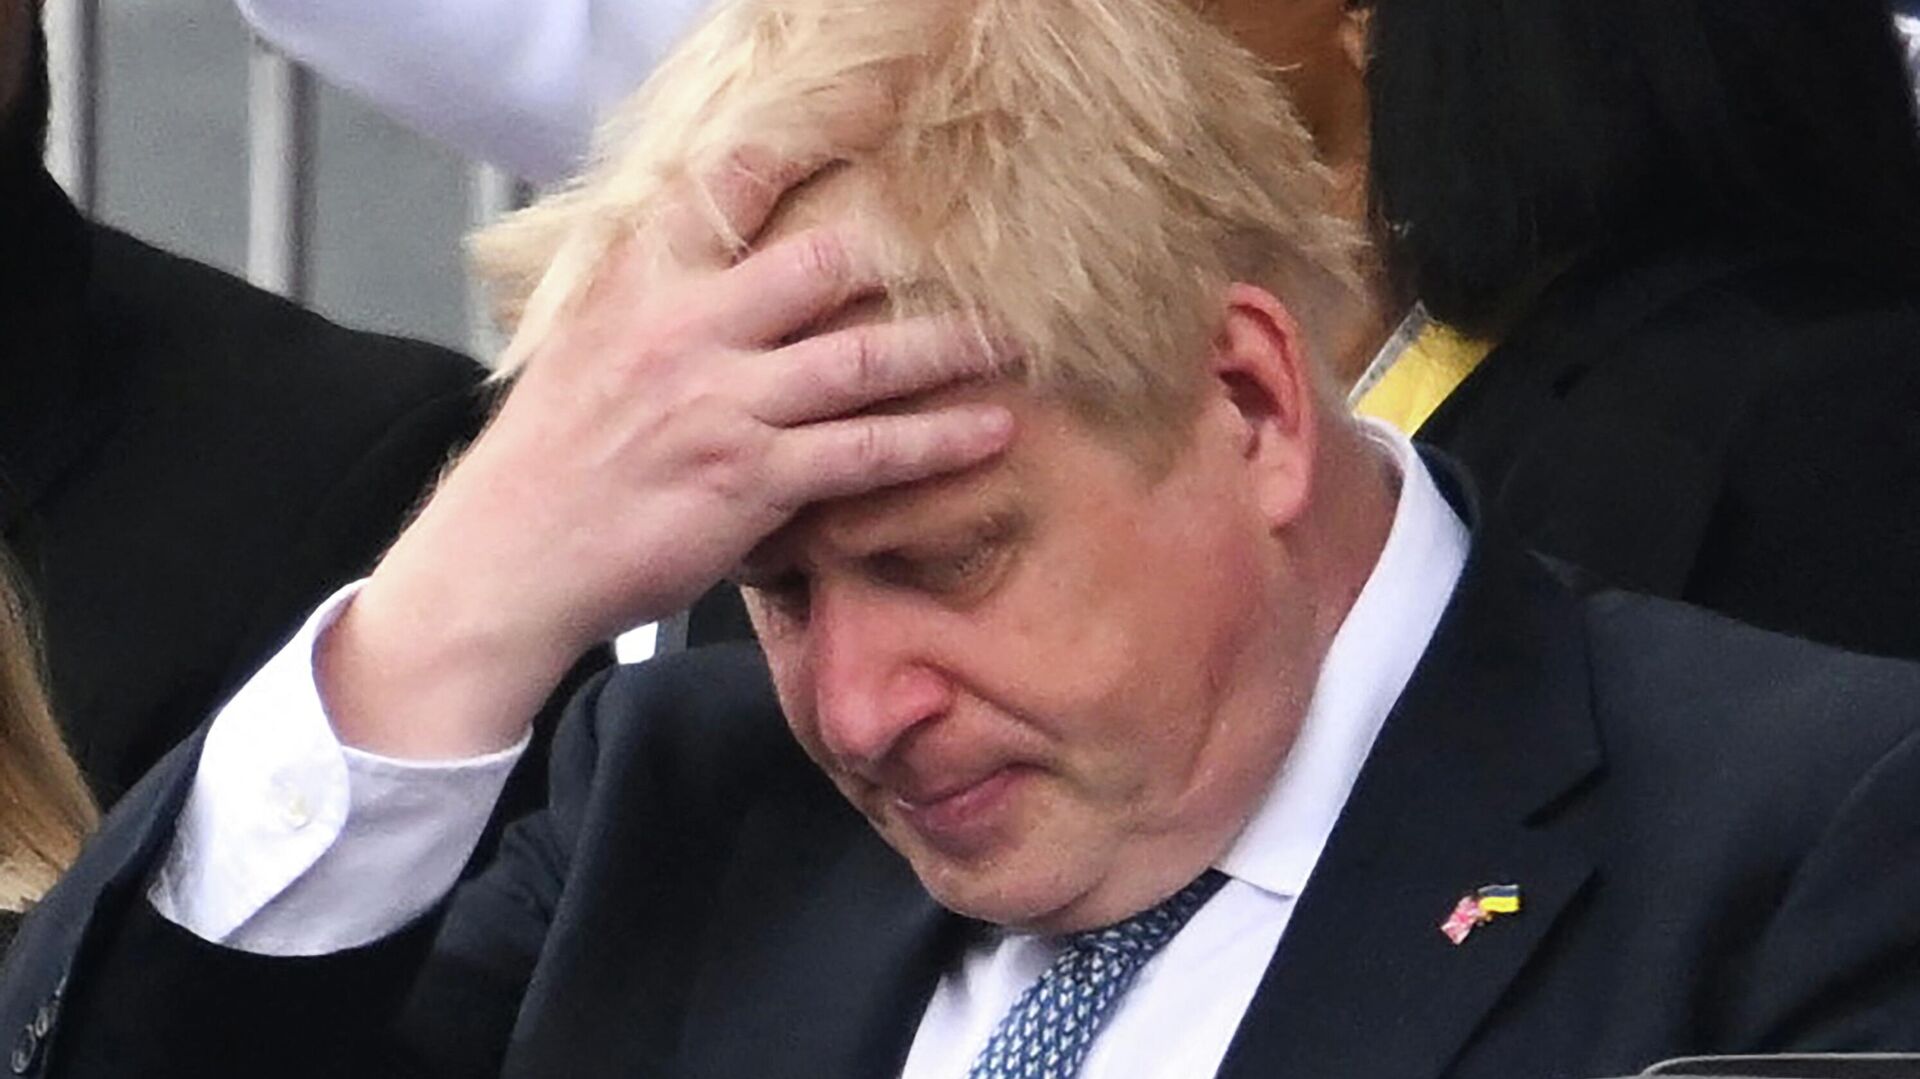 (FILES) In this file photo taken on June 5, 2022 shows Britain's Prime Minister Boris Johnson reacts during the Platinum Pageant in London on June 5, 2022 as part of Queen Elizabeth II's platinum jubilee celebrations - Sputnik International, 1920, 06.06.2022